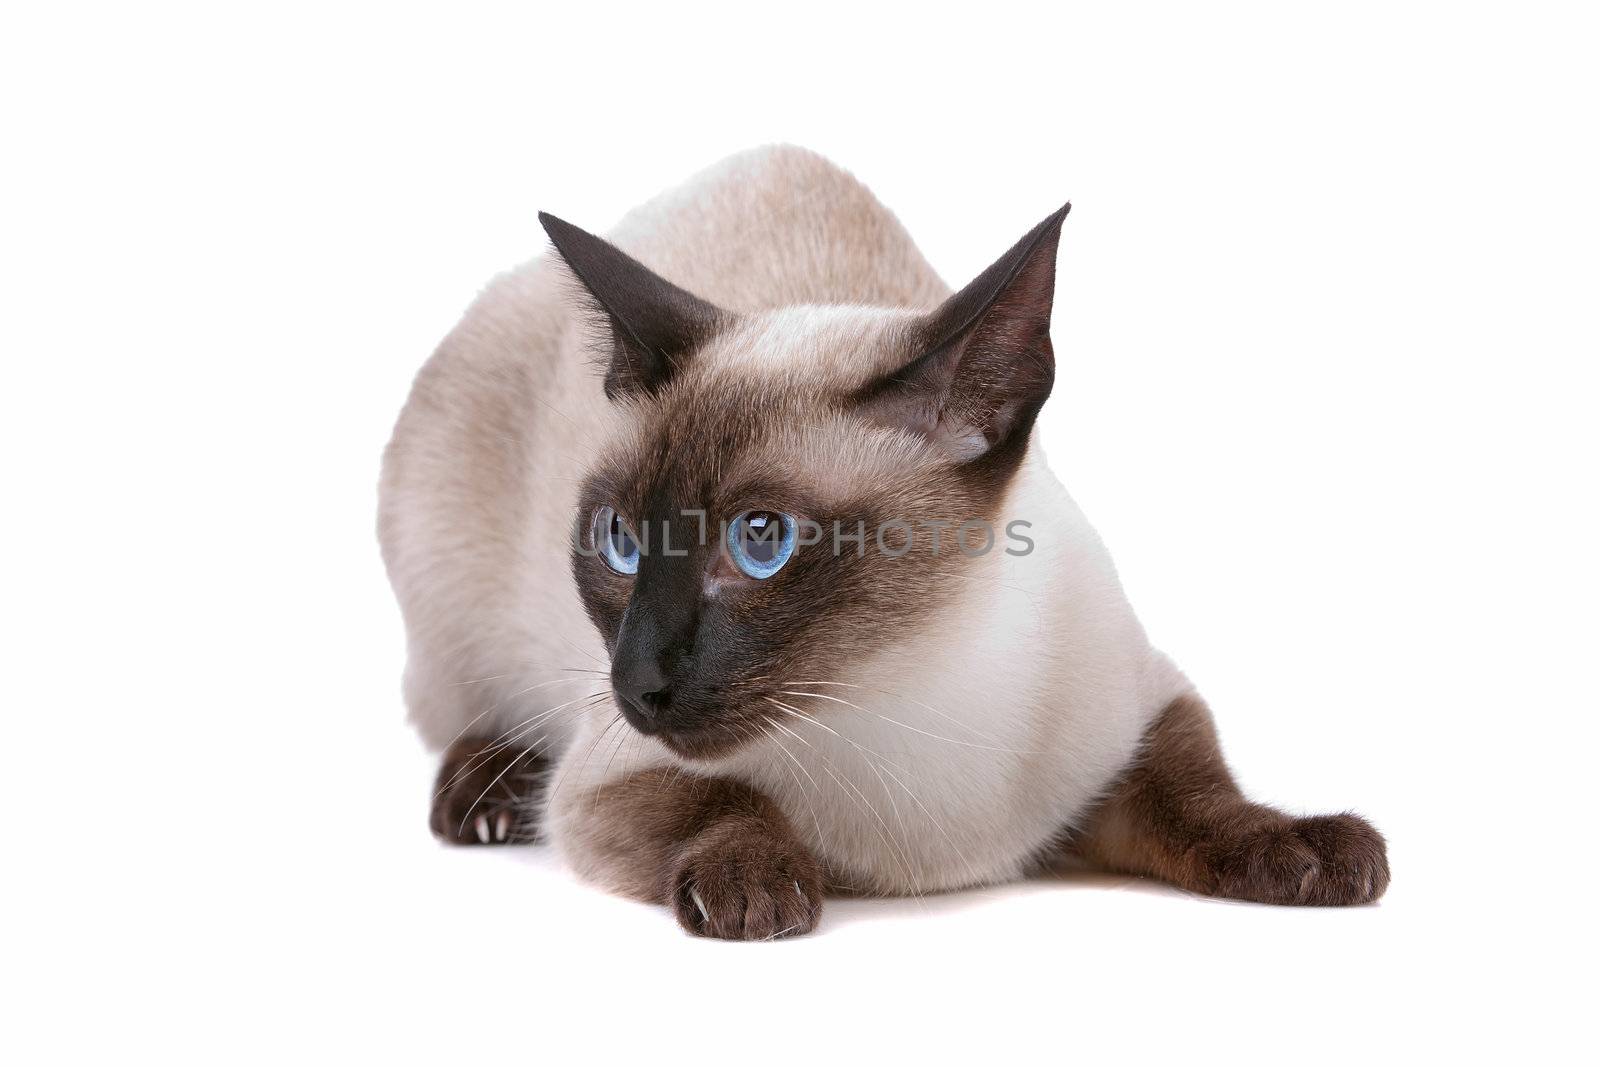 Front view of cute Siamese cat looking sideways, on a white background